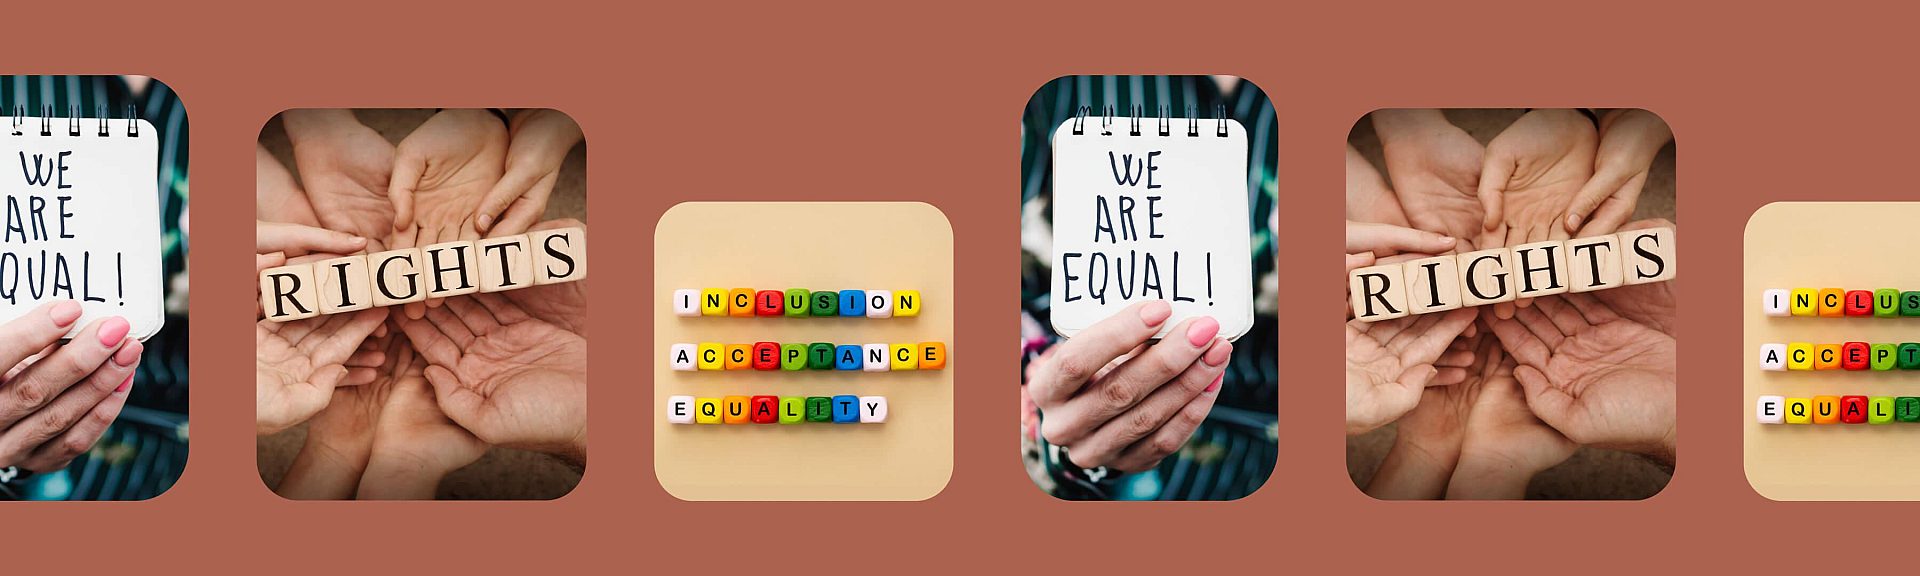 A graphic decorative image with 3 images repeated in a grid pattern, the first one with a notepad and the text 'We are equal!' written on it. The second image has a bunch of hands holding some blocks with the text 'Rights' written on them. The final image is a group of coloured blocks with the text 'Inclusion, Acceptance, Equality' written on them.